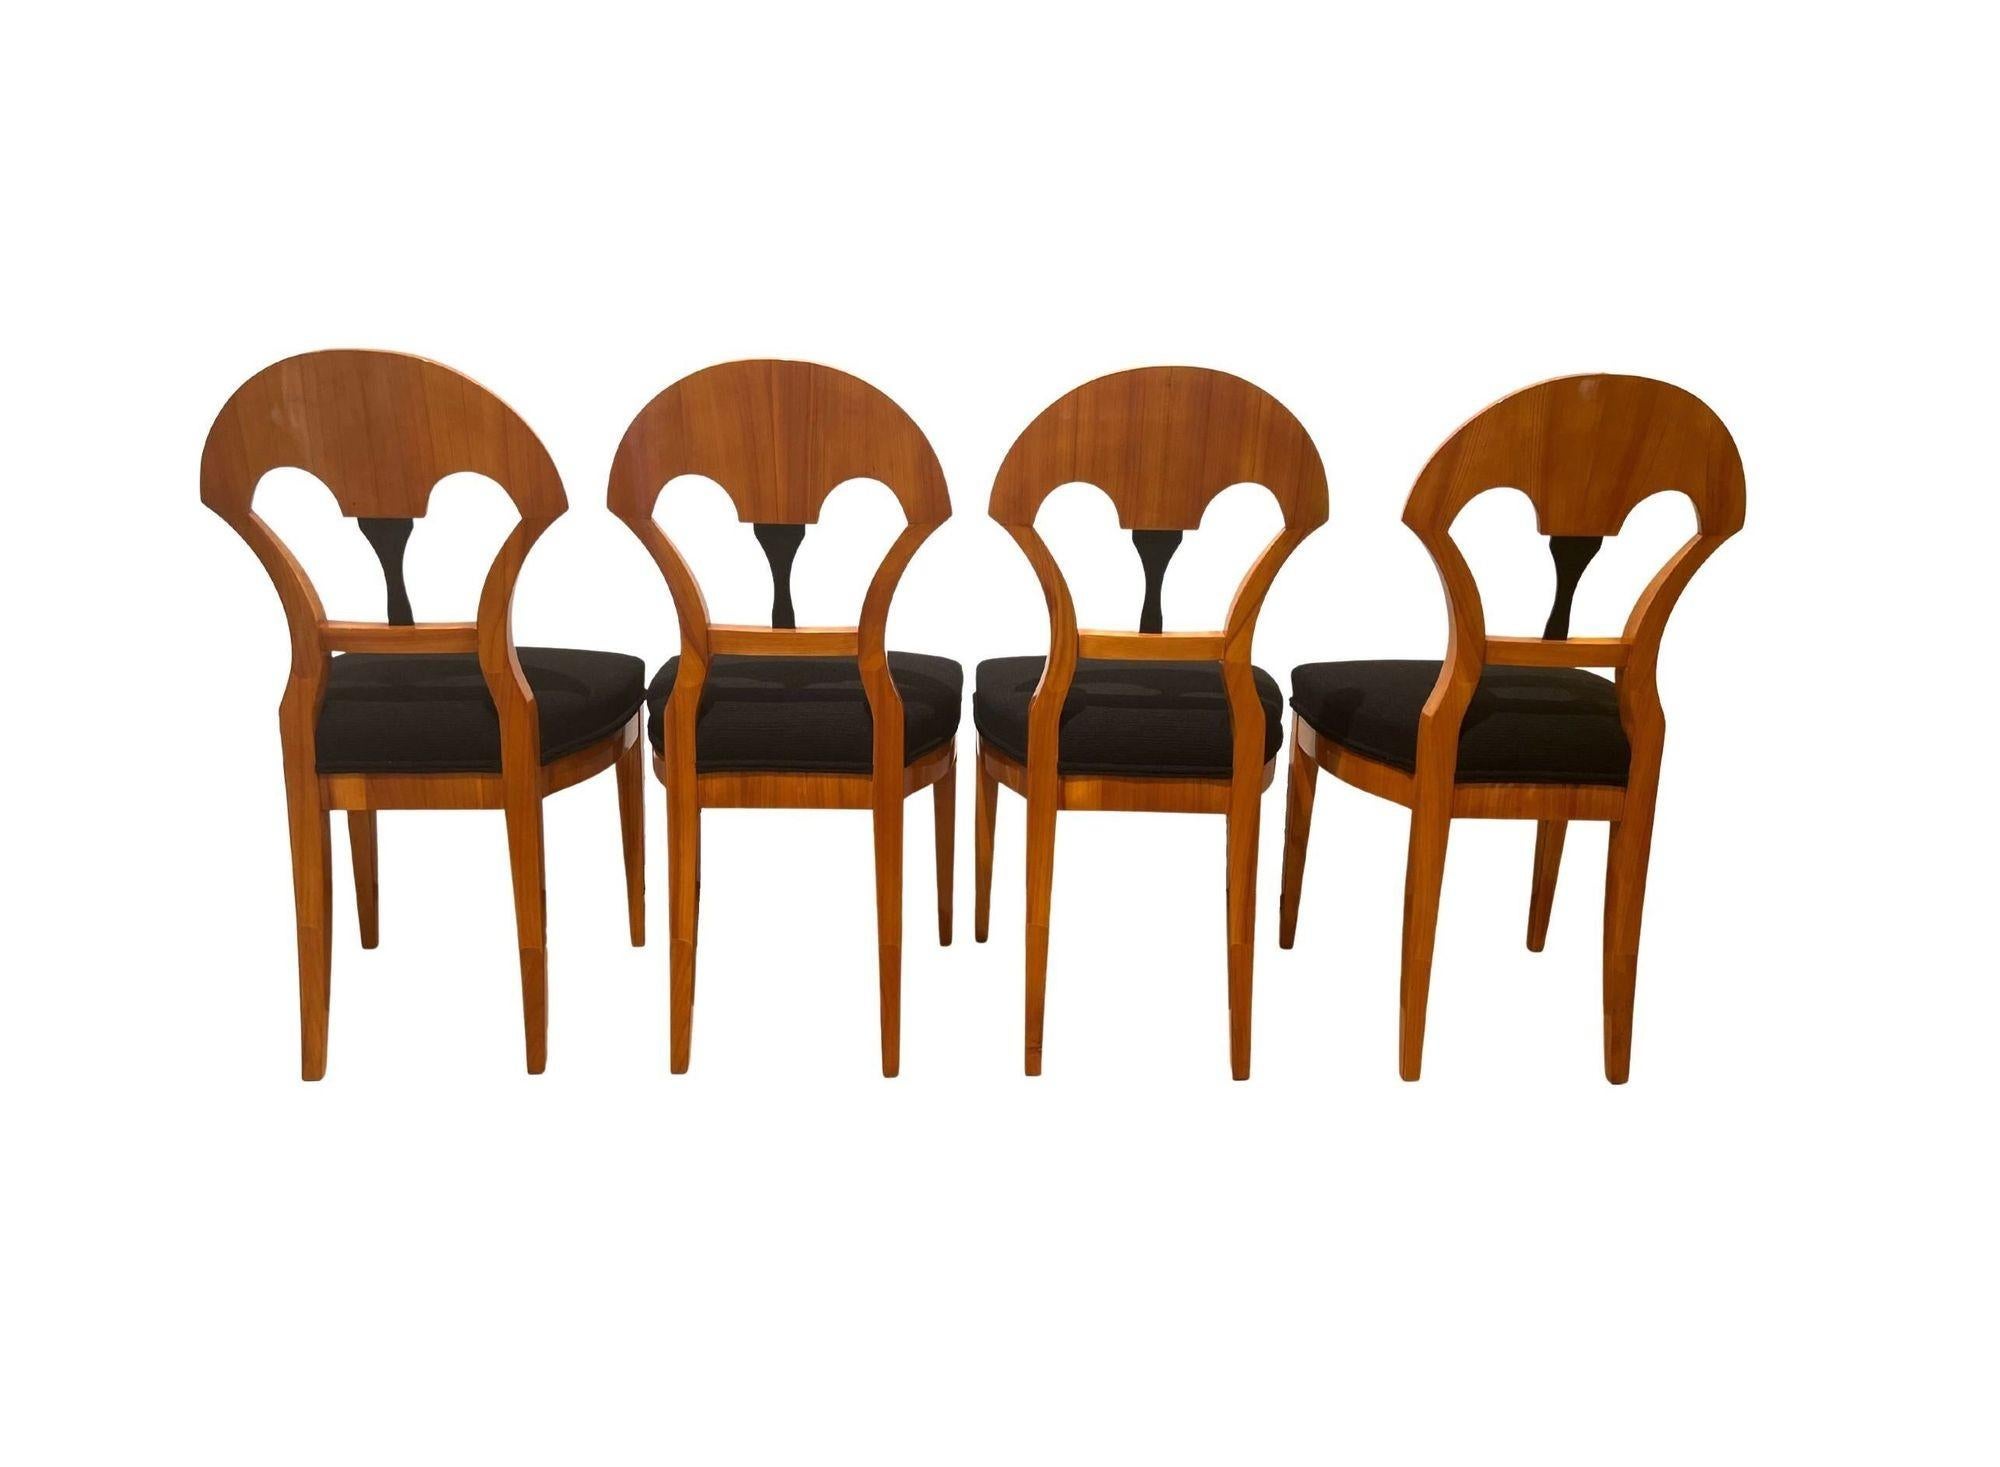 Set of seven Biedermeier chairs, Cherry Veneer, South Germany, circa 1890
 
Set of seven neoclassical style Biedermeier chairs from South Germany around 1890.
 
Cherry veneered on softwood and solid. Hand polished with shellac (French